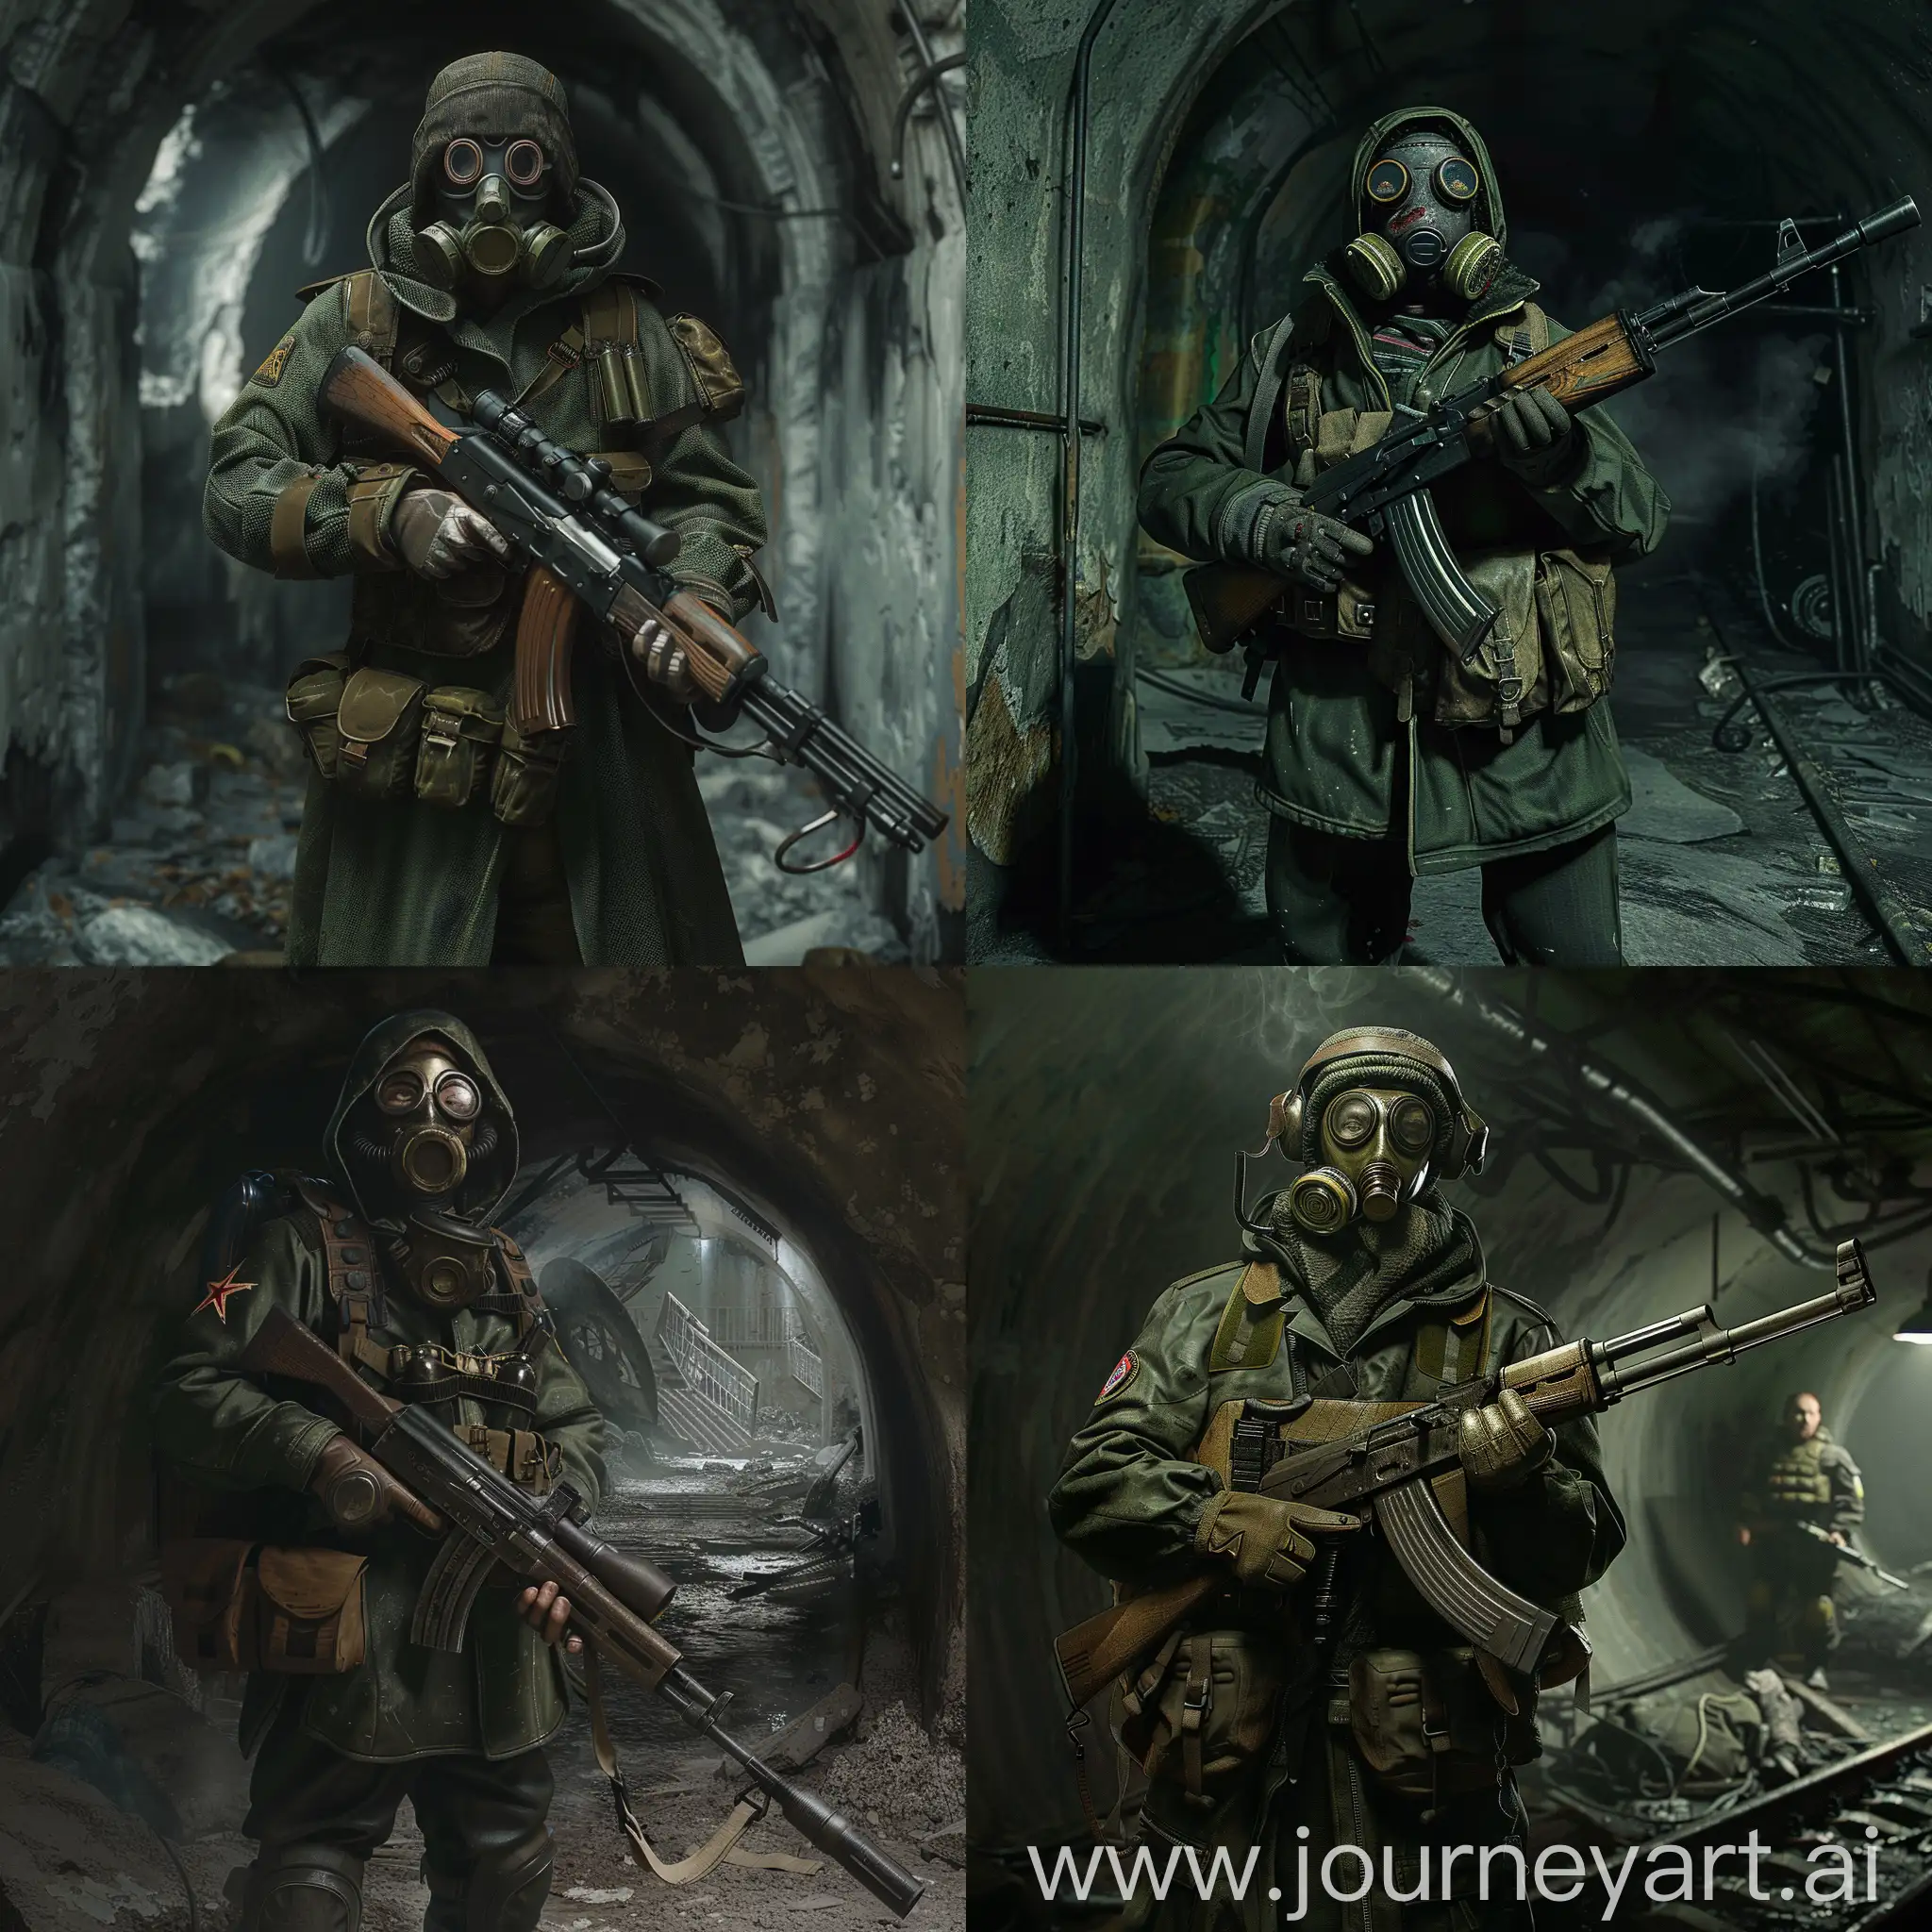 Metro 2033, survivor stand in post-apocalyptic armor and gasmask in a dirty and abandoned catacombs, he hold an old Soviet sniper rifle with both hands, lack of light sources, darkness, despondency, tension.